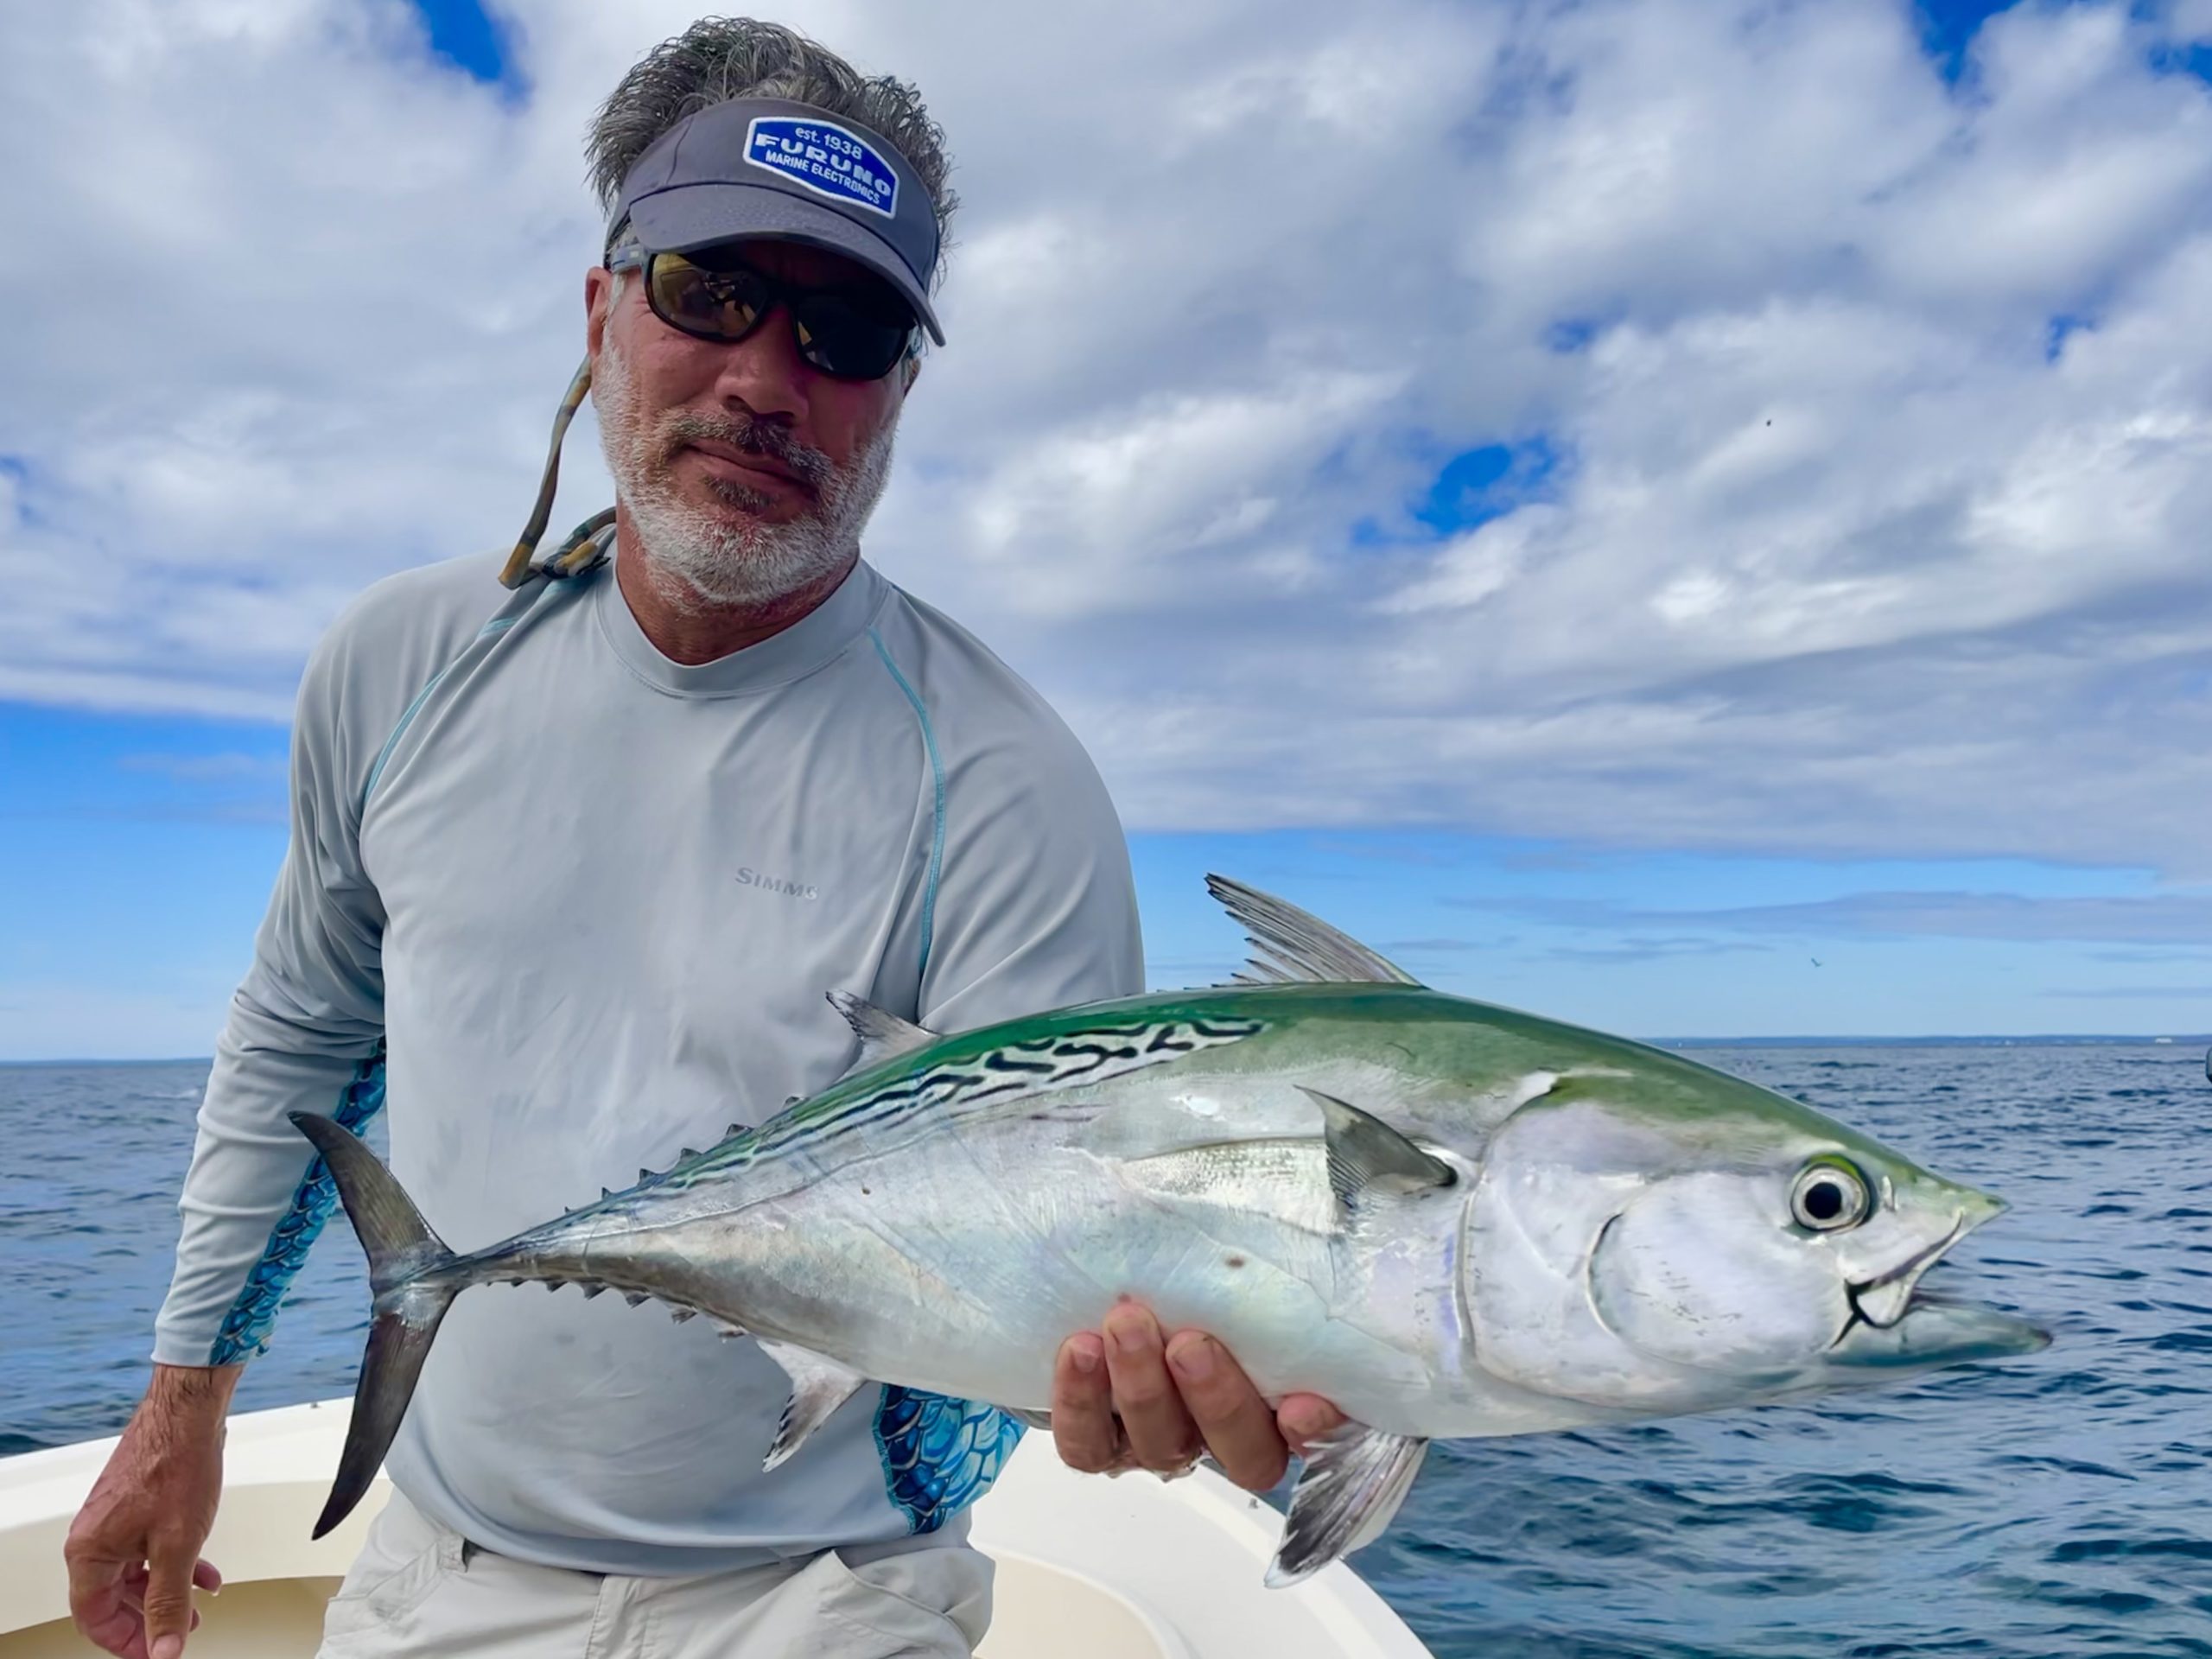 False albacore have been frustratingly hard to find for South Fork anglers this year. But Todd Richter found this one off East Hampton over the weekend.